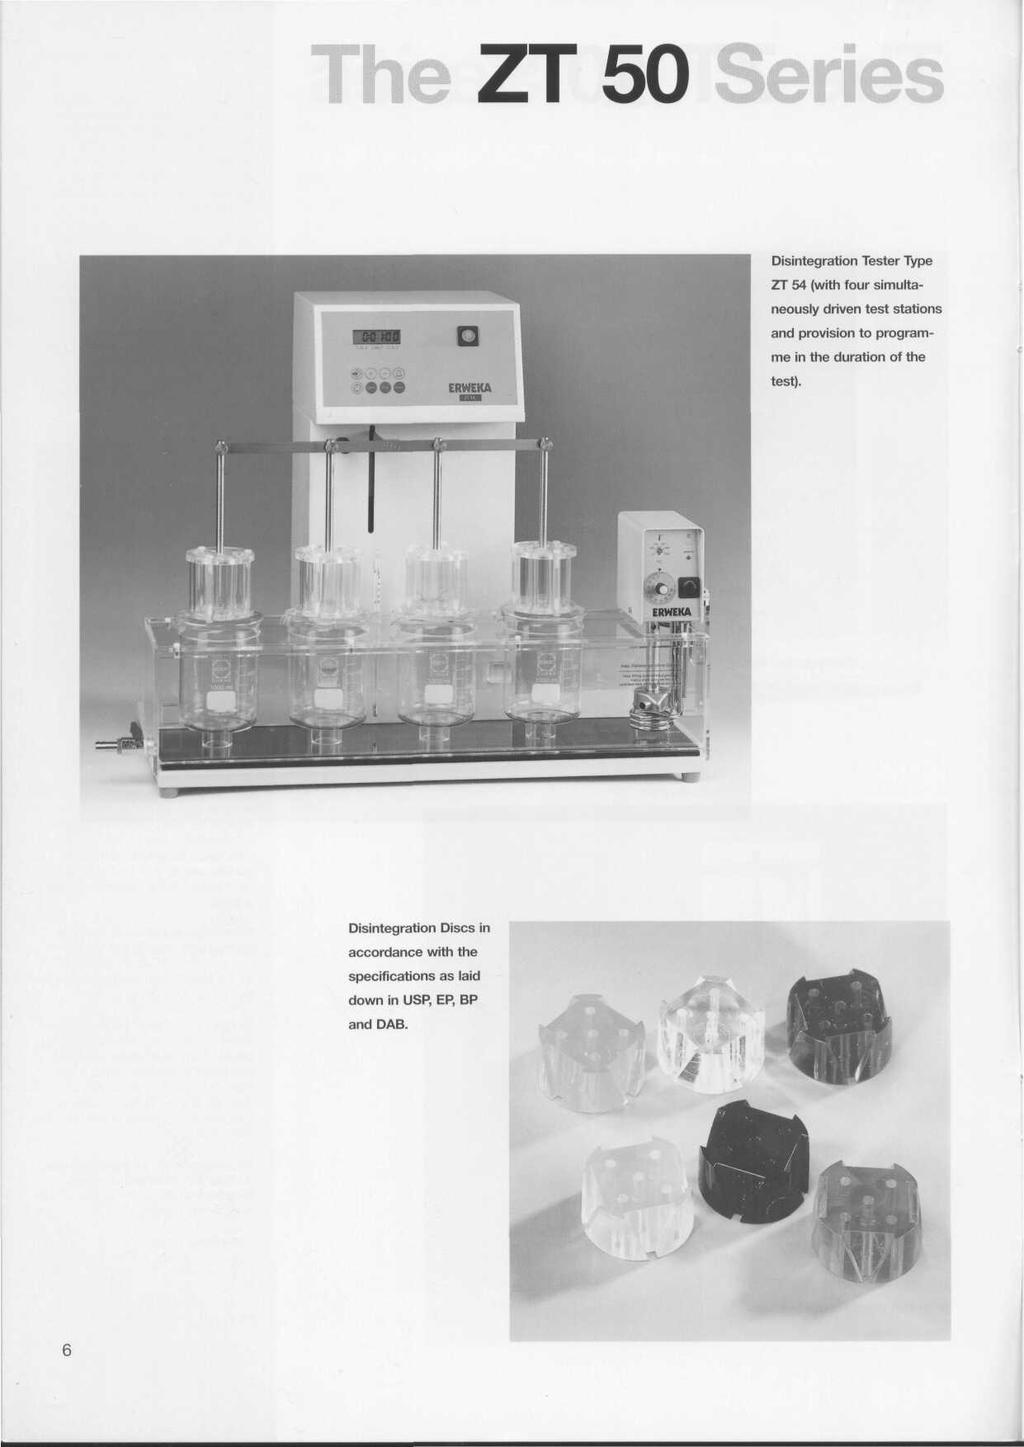 The ZT 50 Series Disintegration Tester Type ZT 54 (with four simultaneously driven test stations and provision to programme